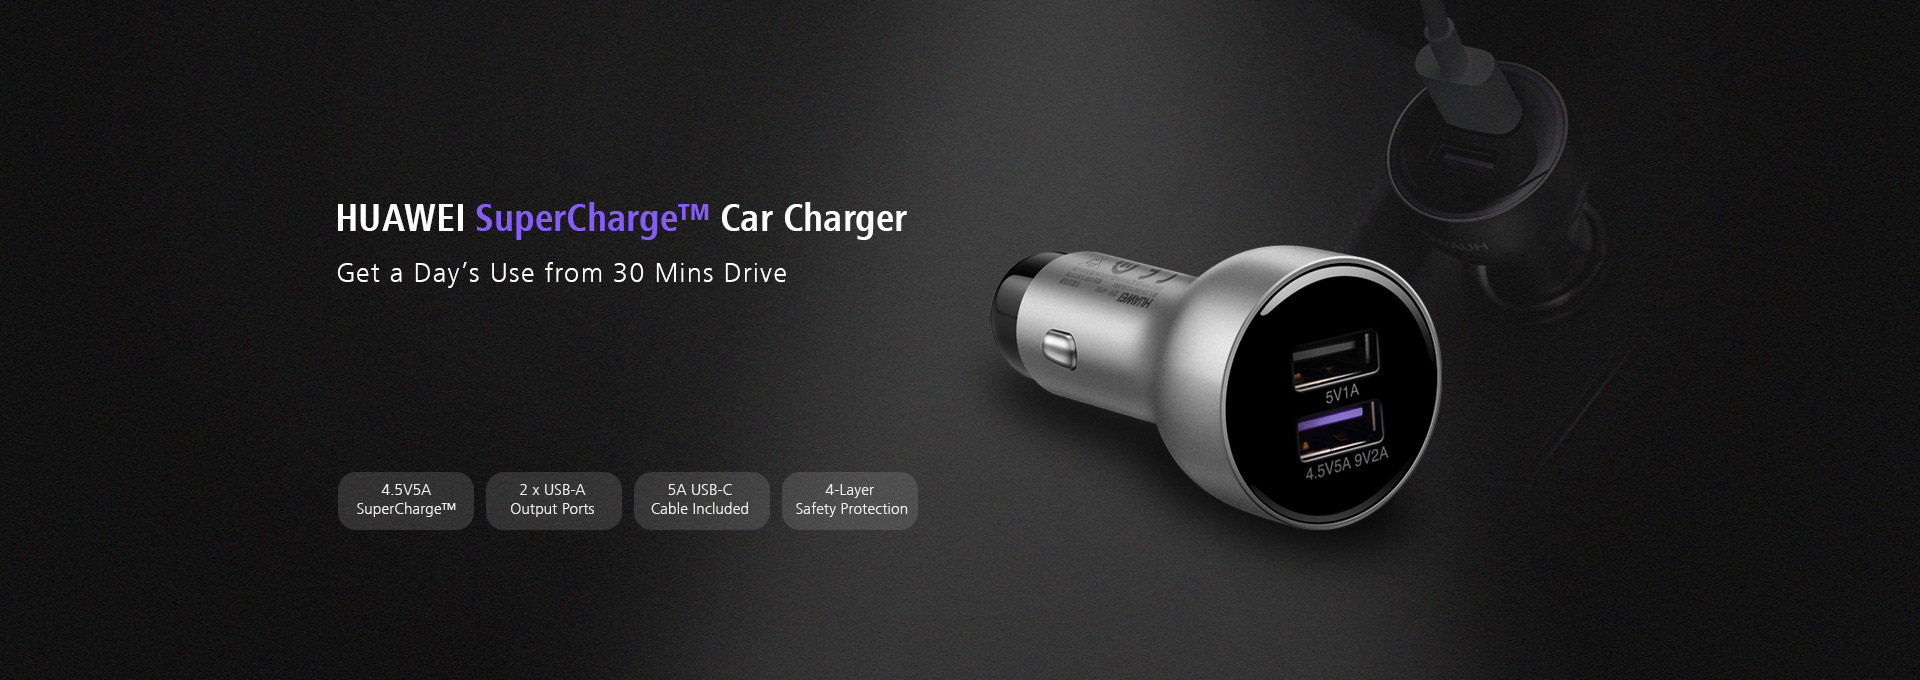 Huawei SuperCharge Car Charger in Silver 